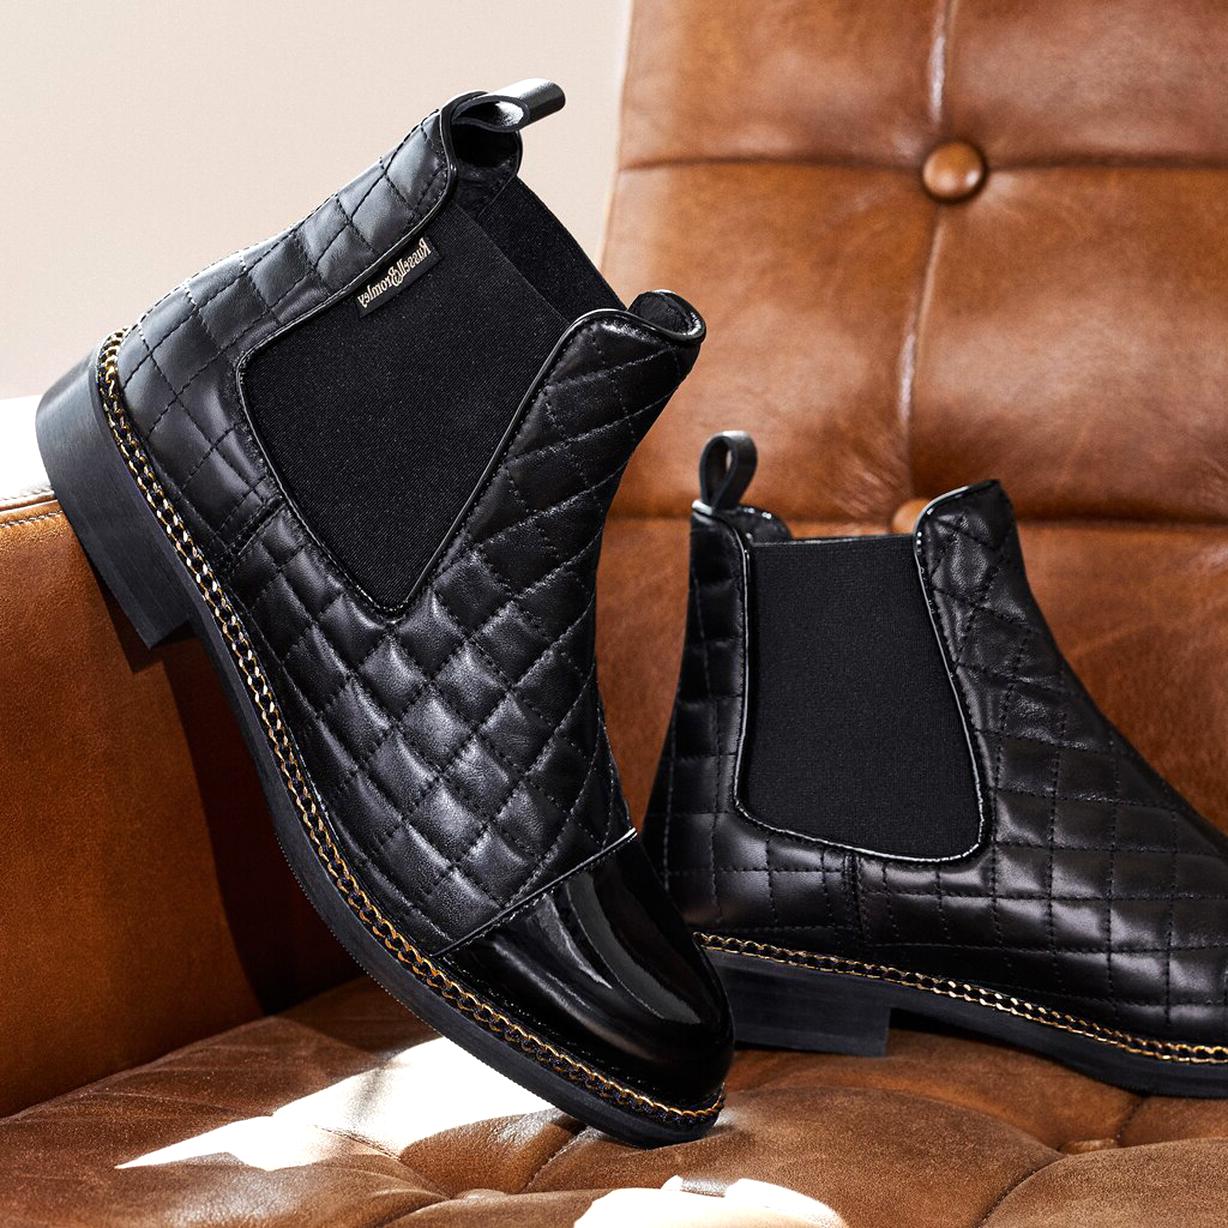 russell and bromley boots sale